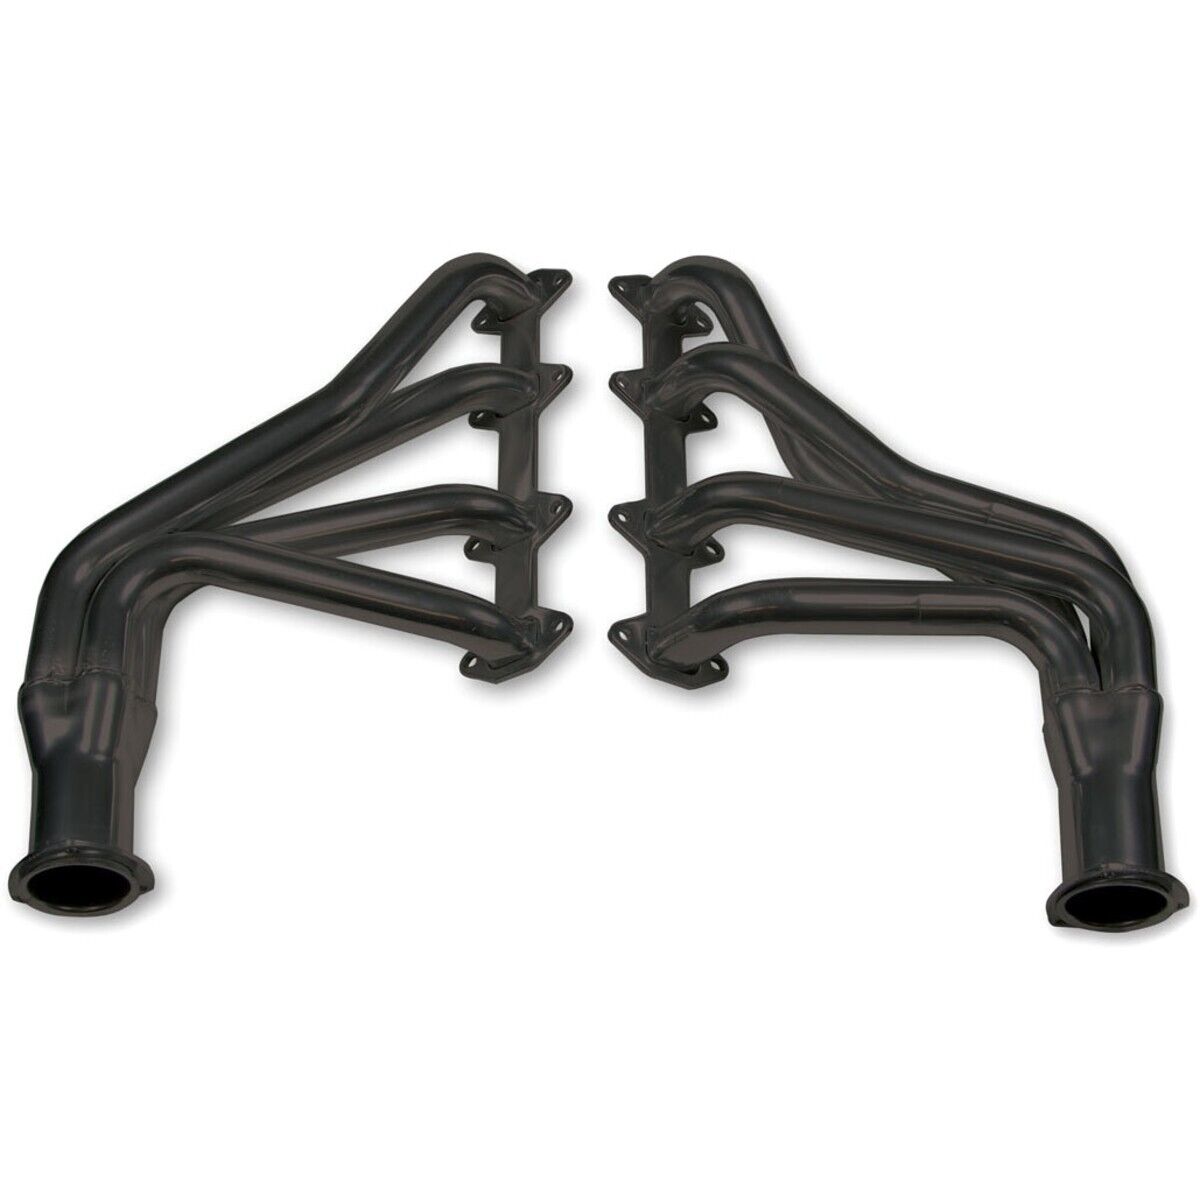 12540FLT Flowtech Set of 2 Headers for Truck F150 F250 F350 Ford F-150 Pair